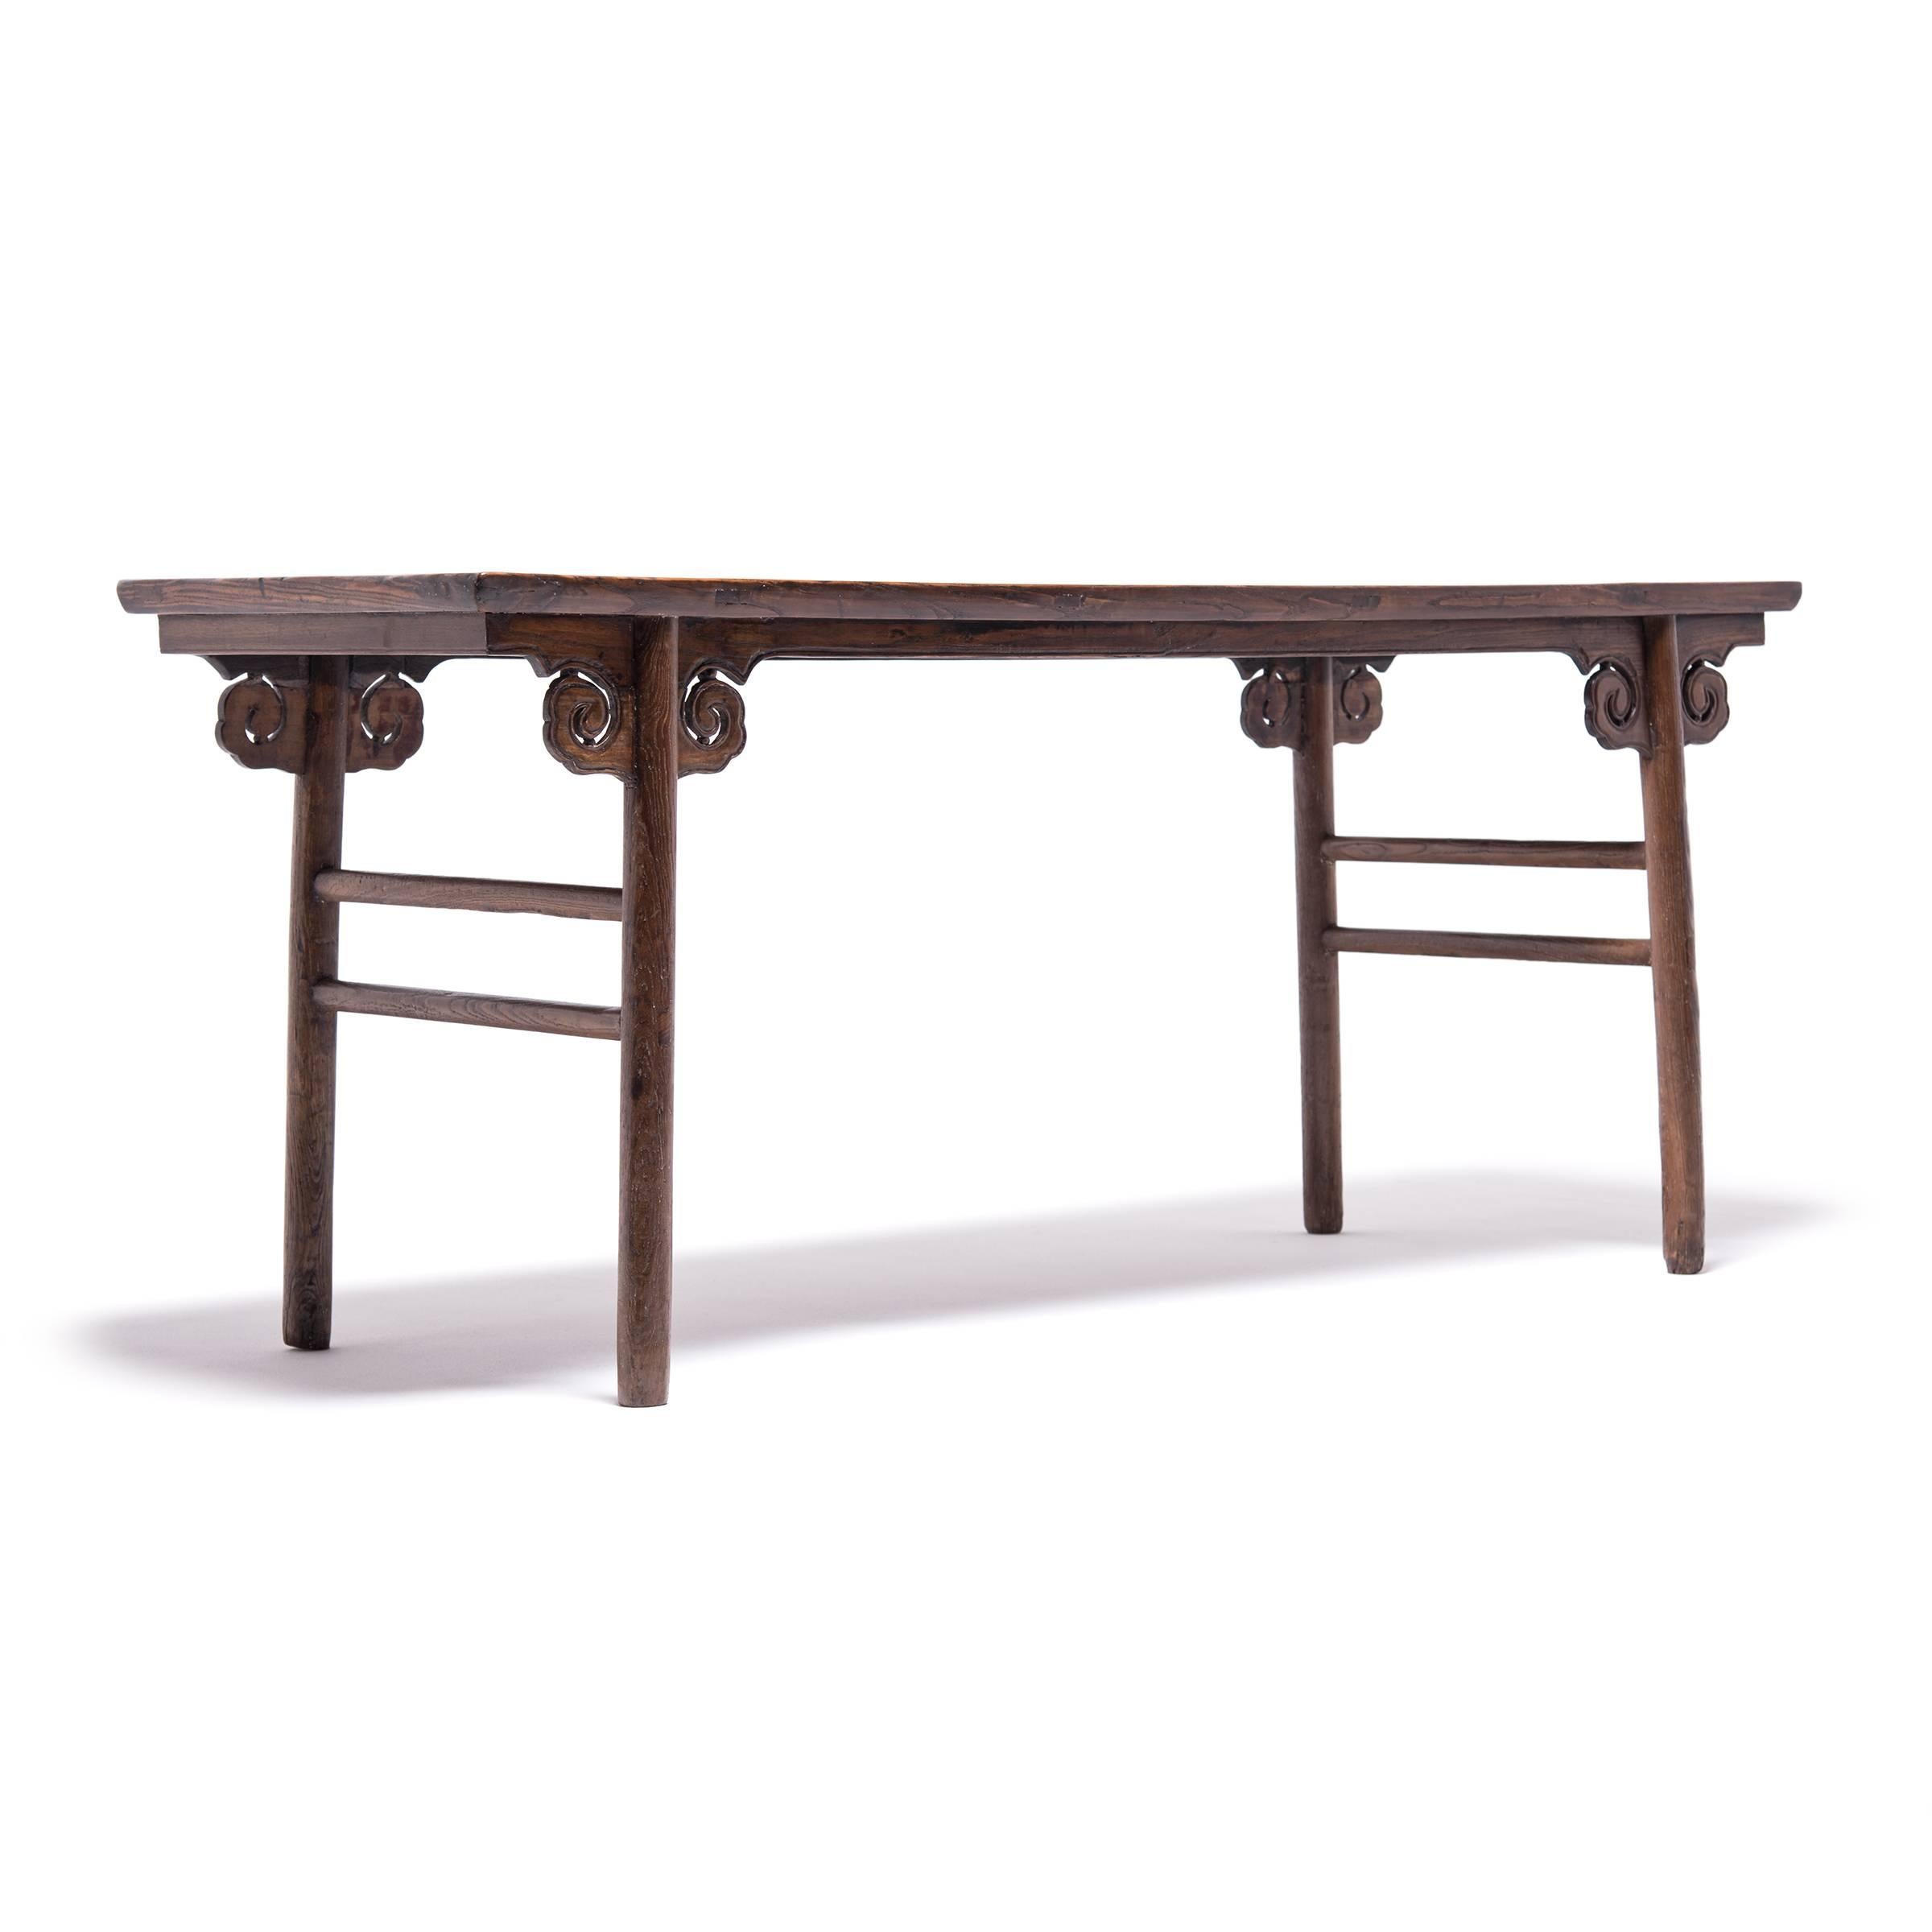 The profile of this simple yet elegant Chinese table resembles the number two written as two horizontal strokes. Made in northern China’s Shanxi province more than 150 years ago, the table is subtly detailed with carved cloud spandrels and laddered